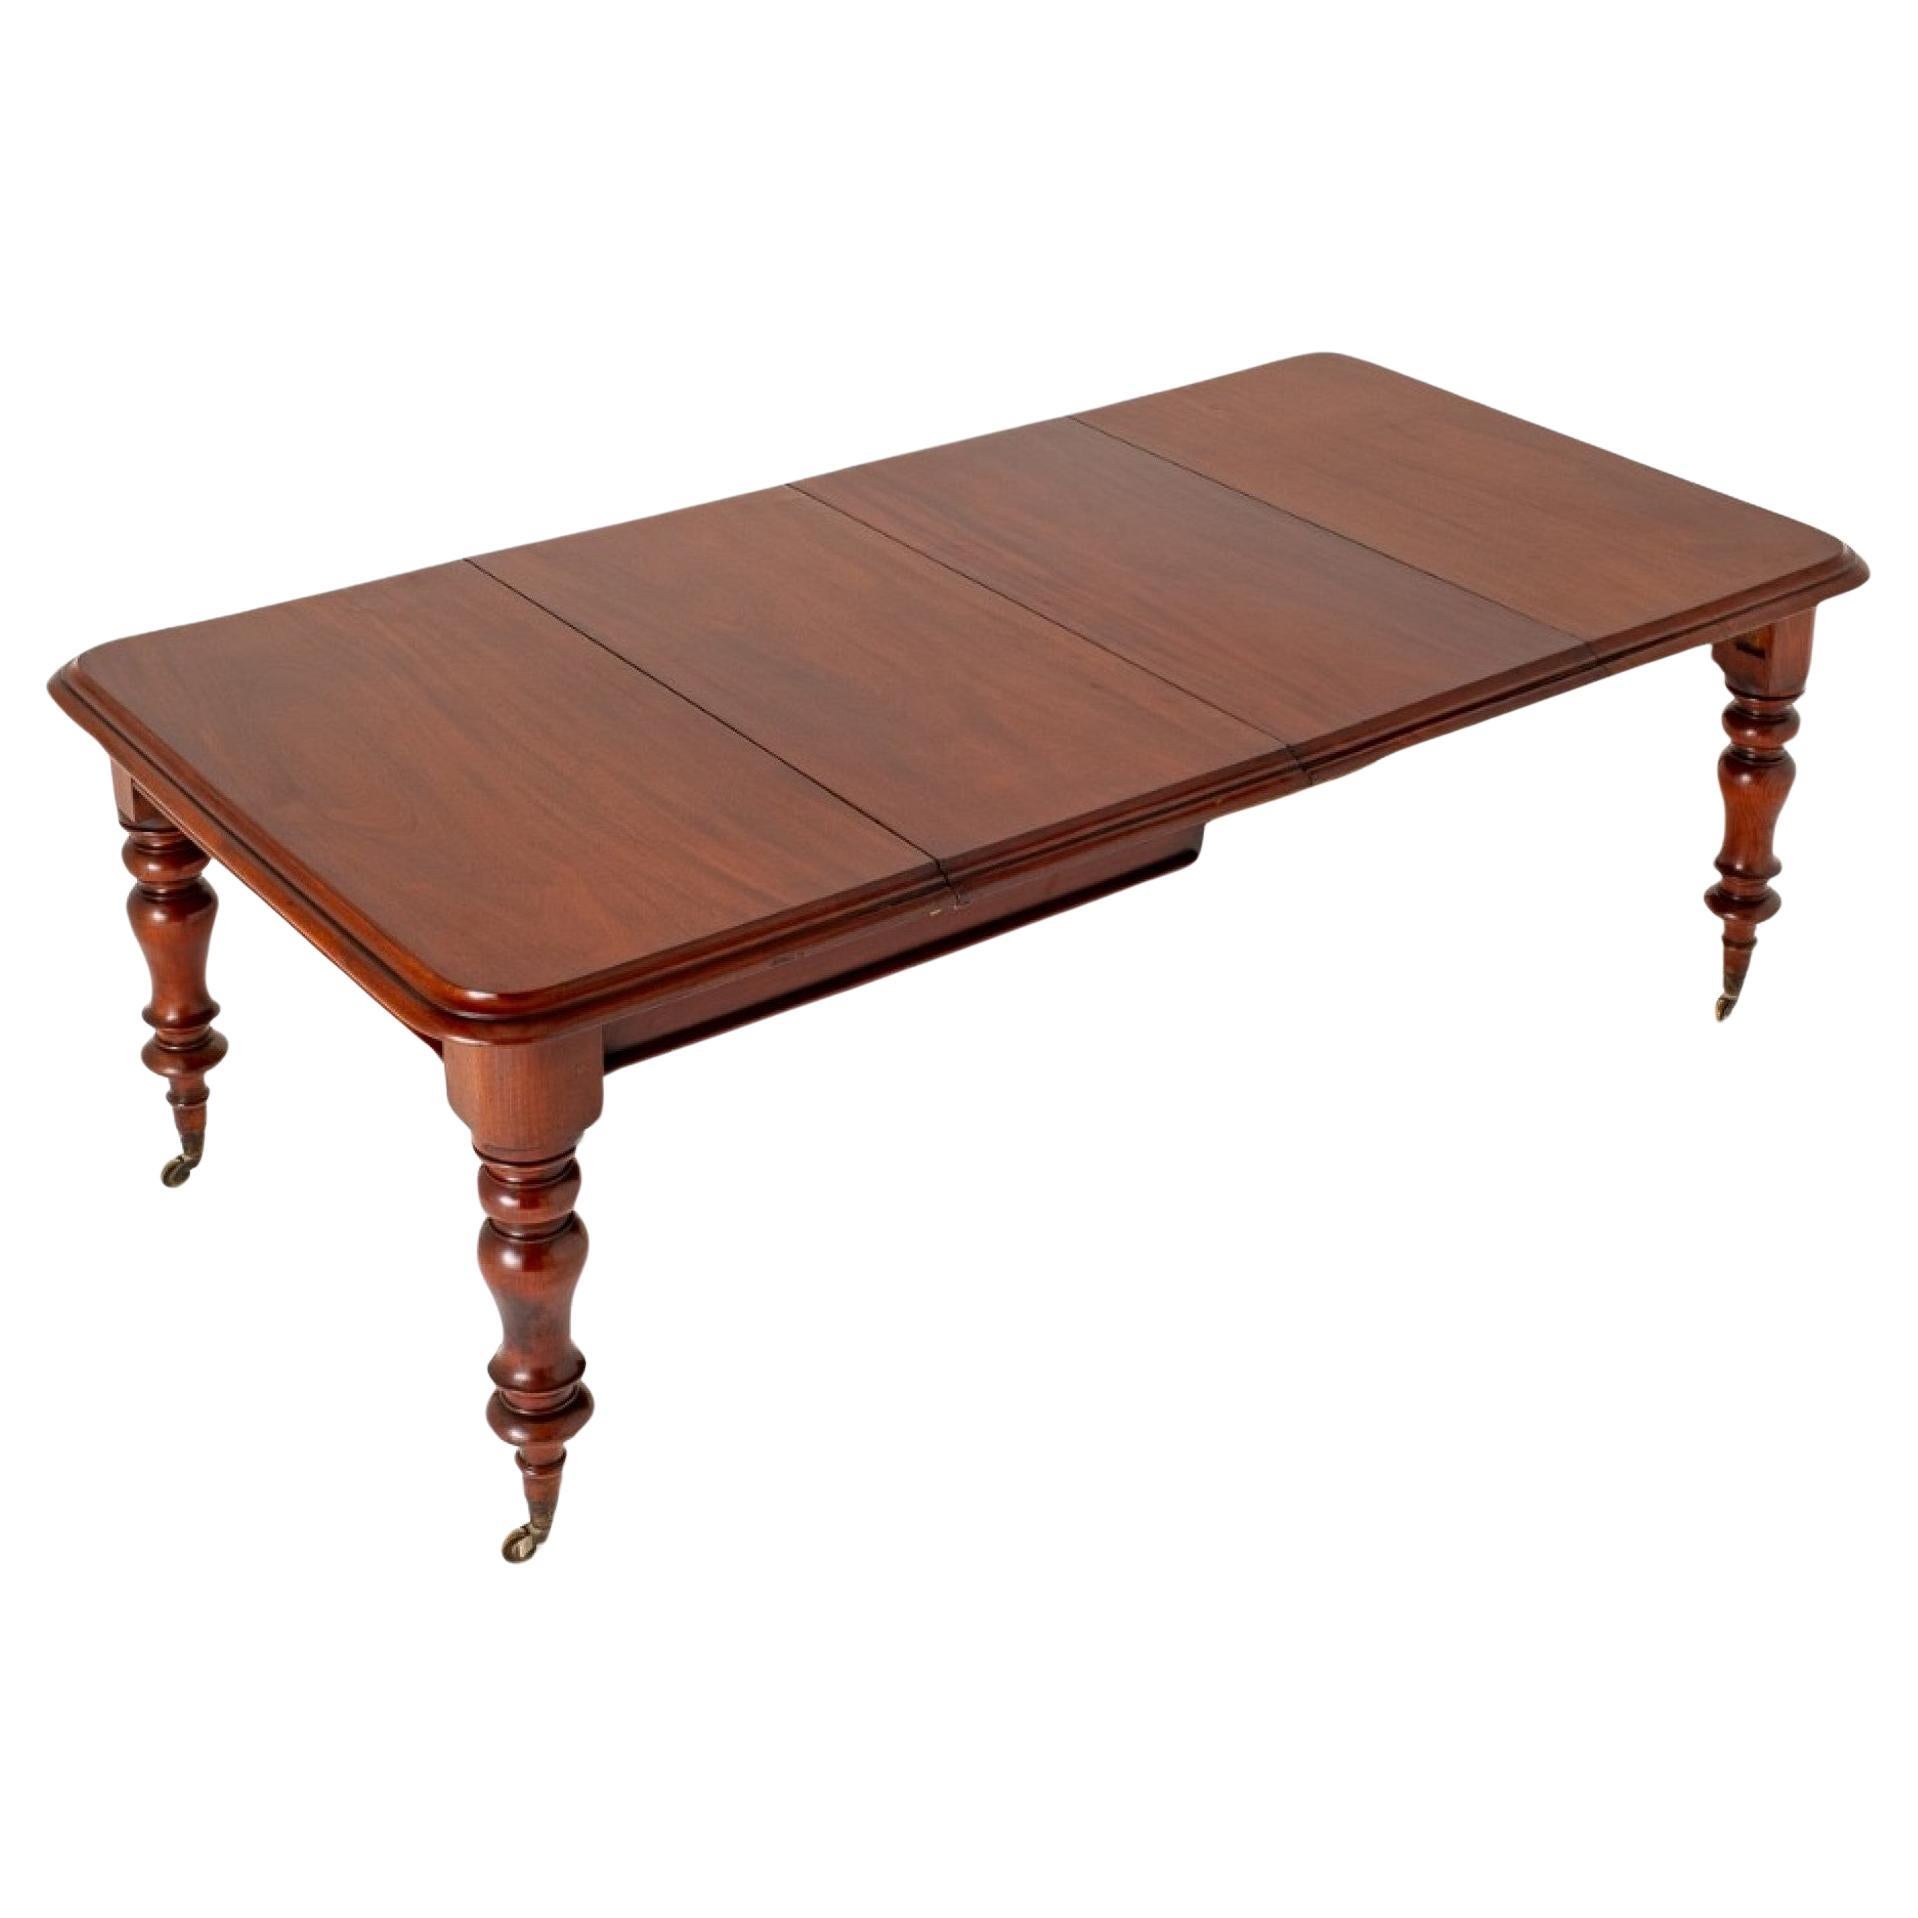 Victorian Dining Table Mahogany 2 Leaf Extending 1860